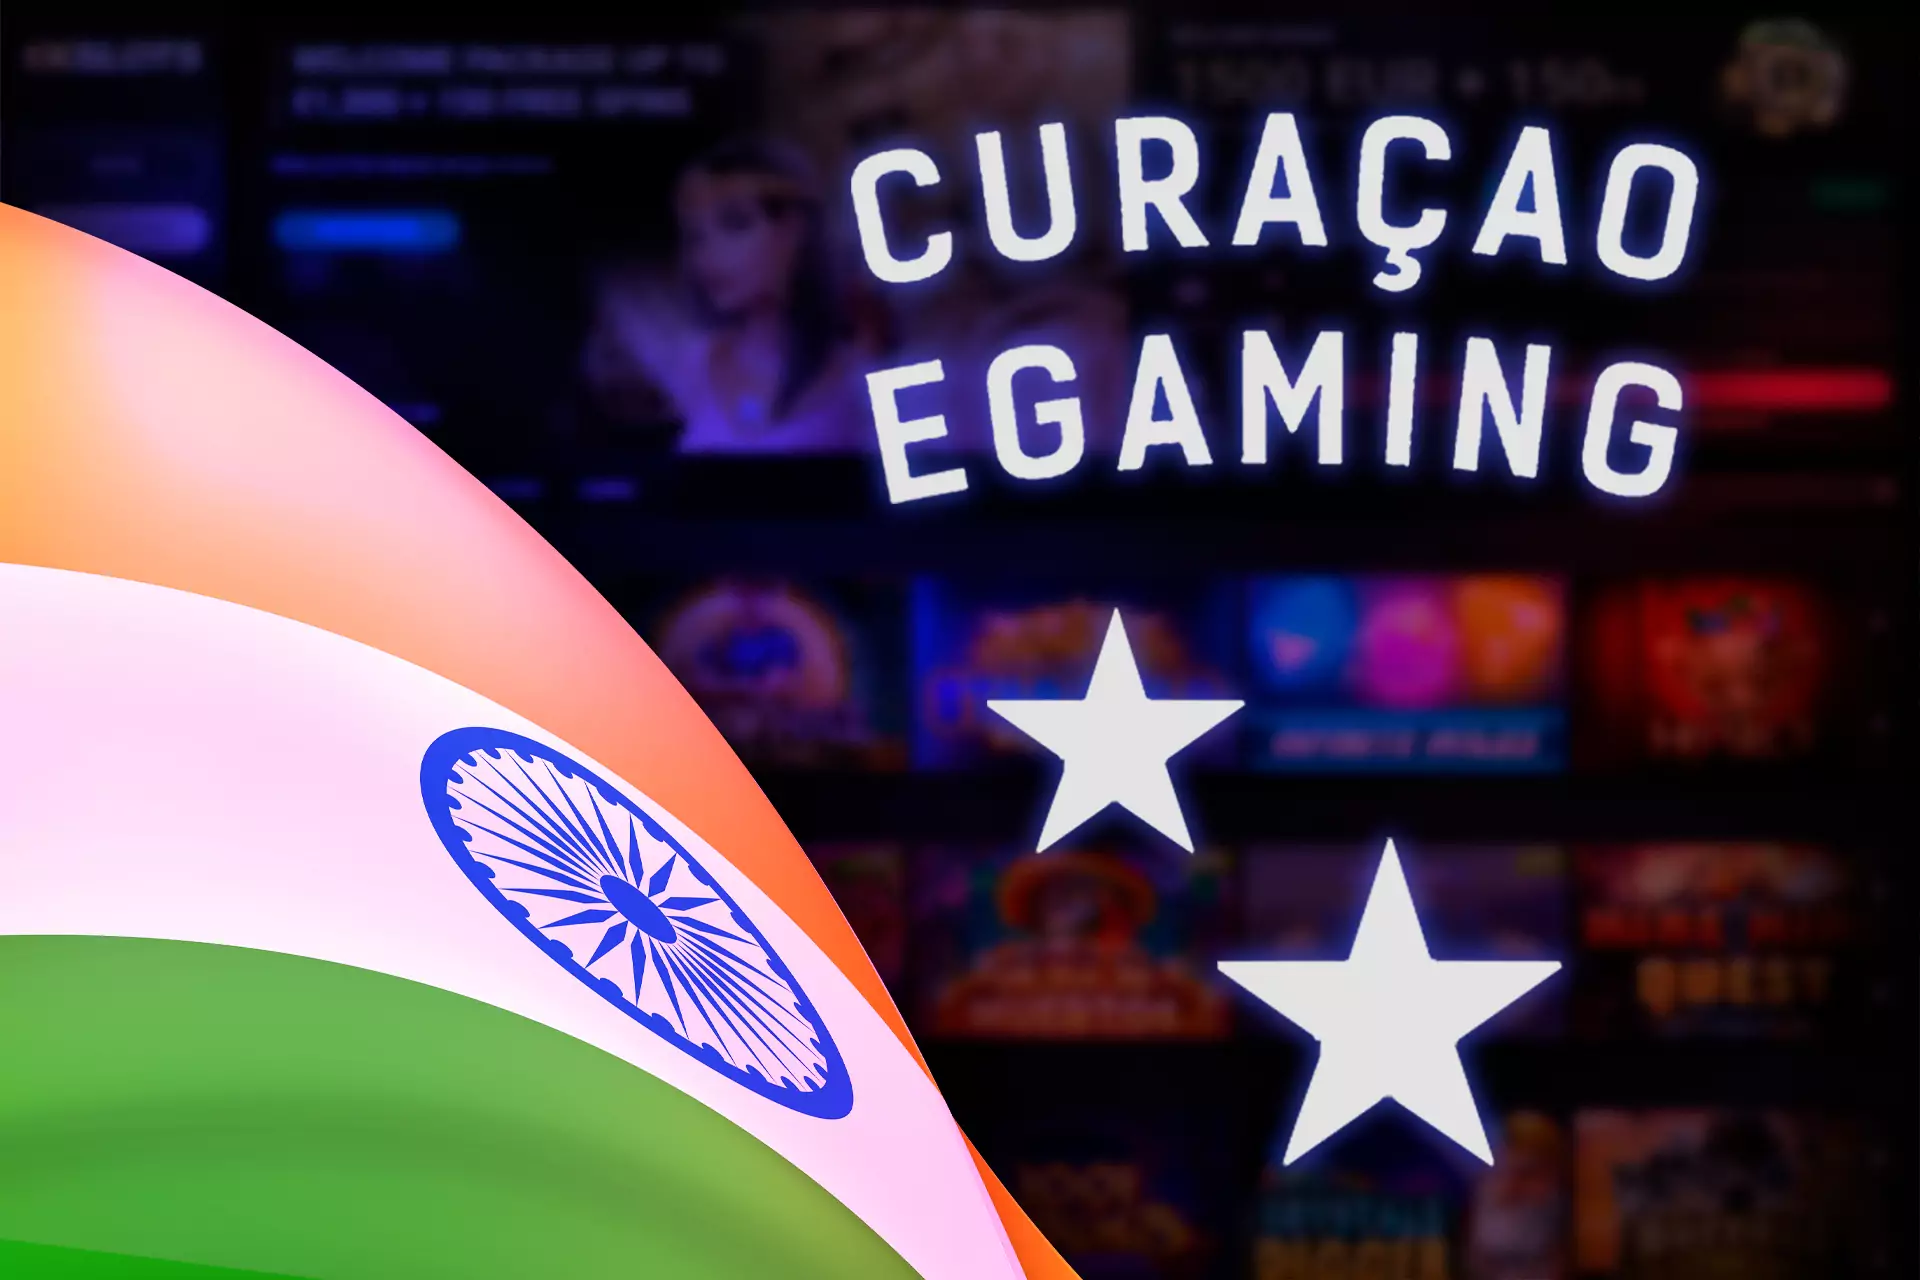 Playing at the 1xSlots site is legal and safe, since the casino got the Curacao Egaming license.